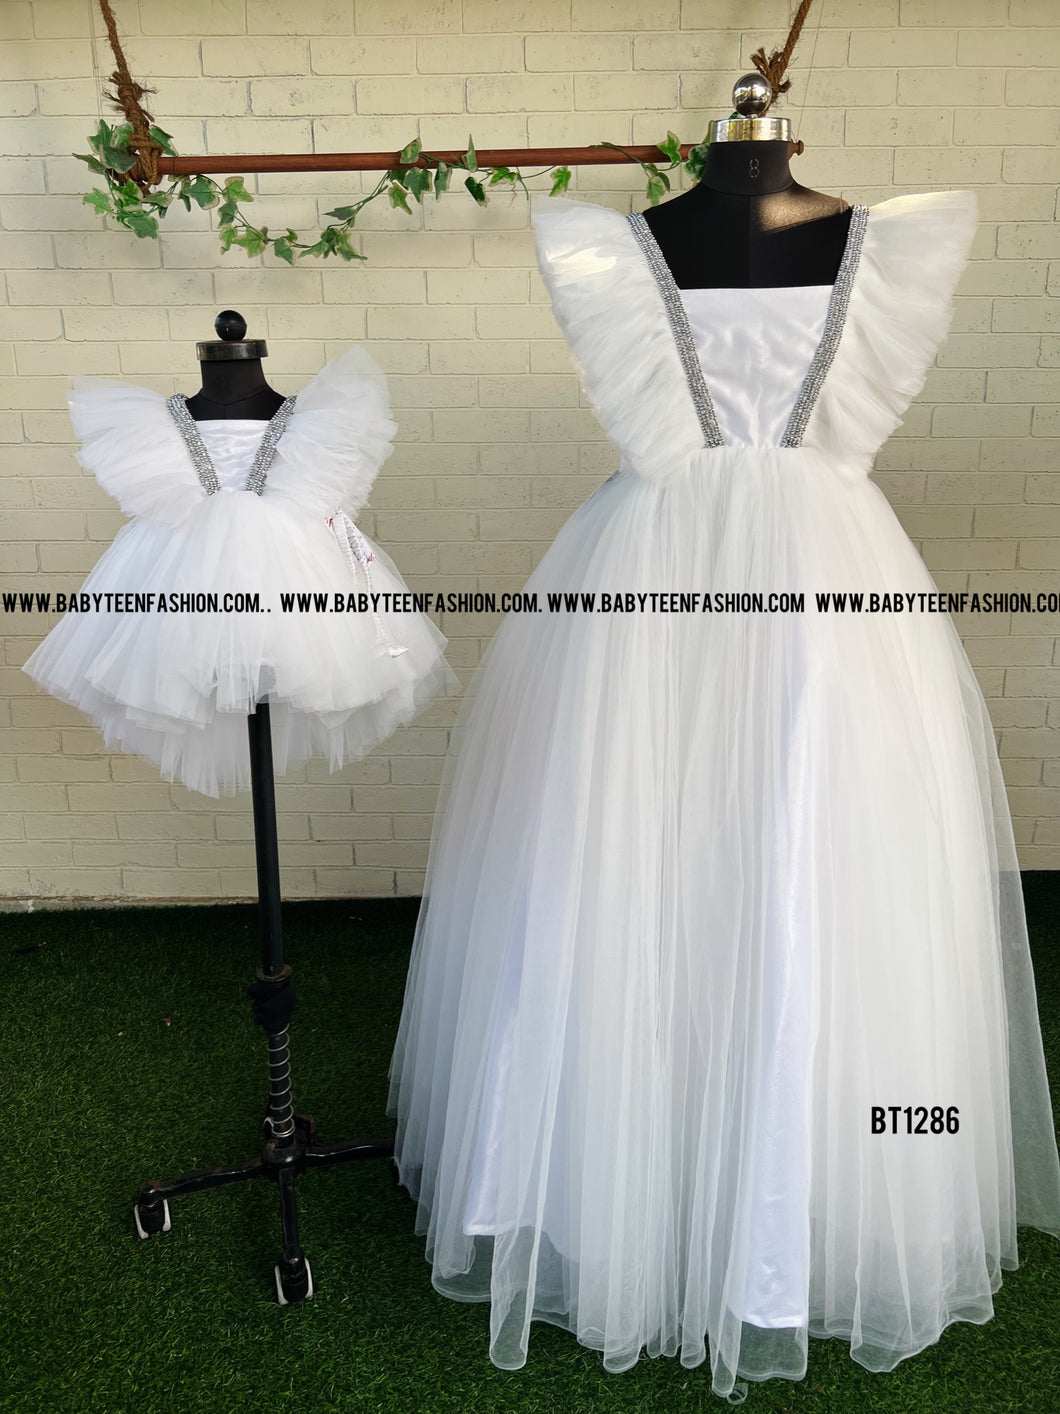 BT1286 White Baptism Mother Adult Gown